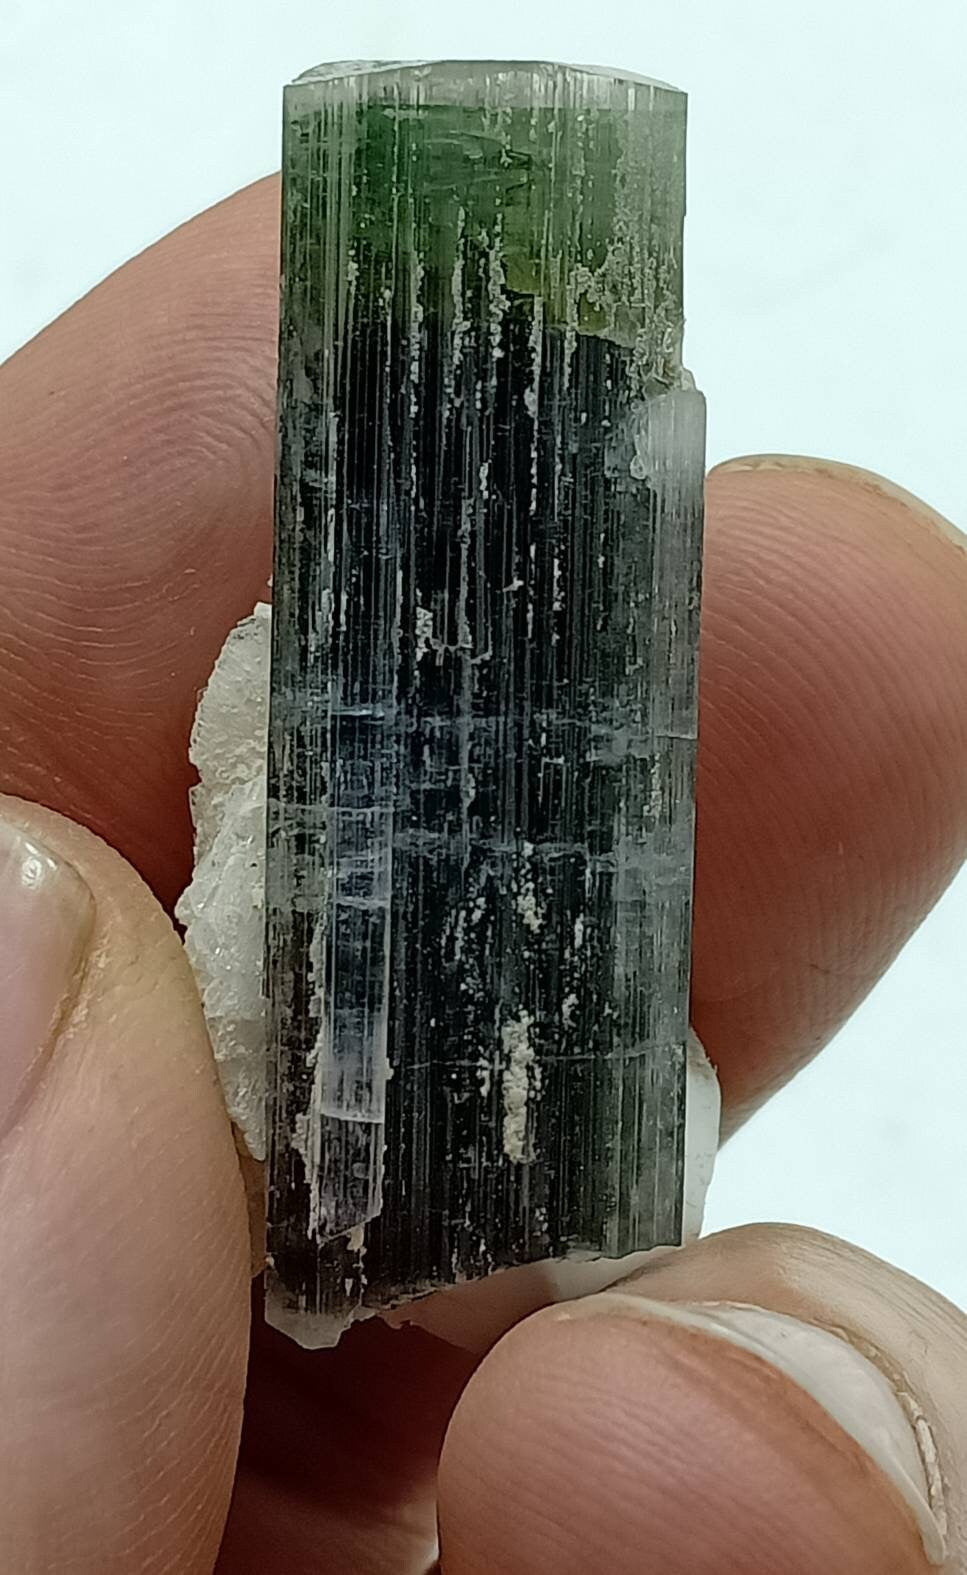 An amazing tricolor Tourmaline crystal with associated Albite from Stak Nala Gilgit Baltistan 12 grams